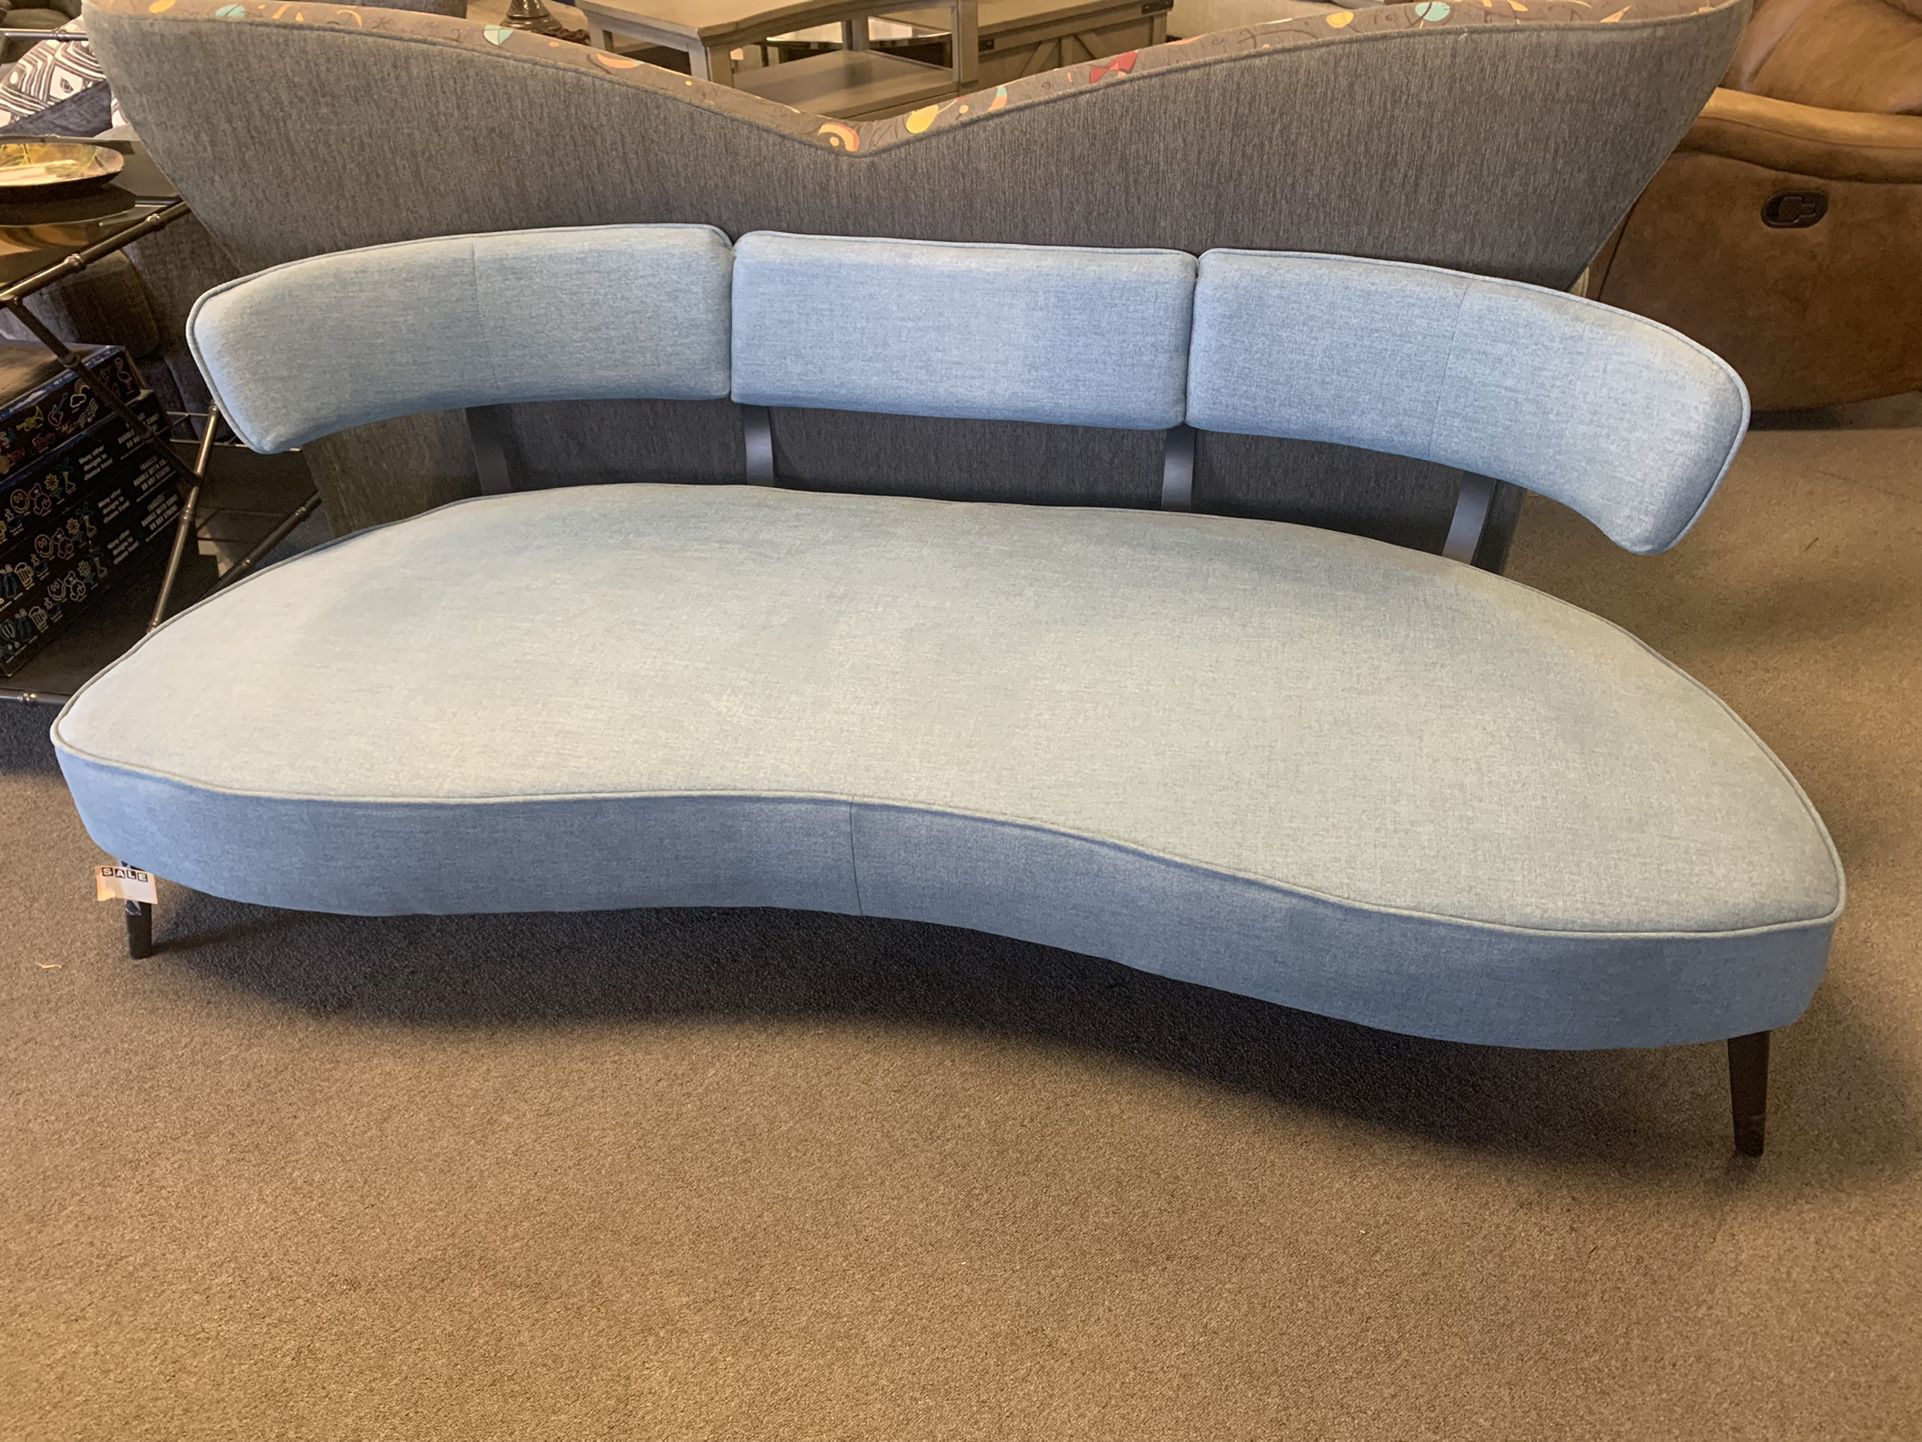 Retro Modern Sofa With Metal Framing In BLUE